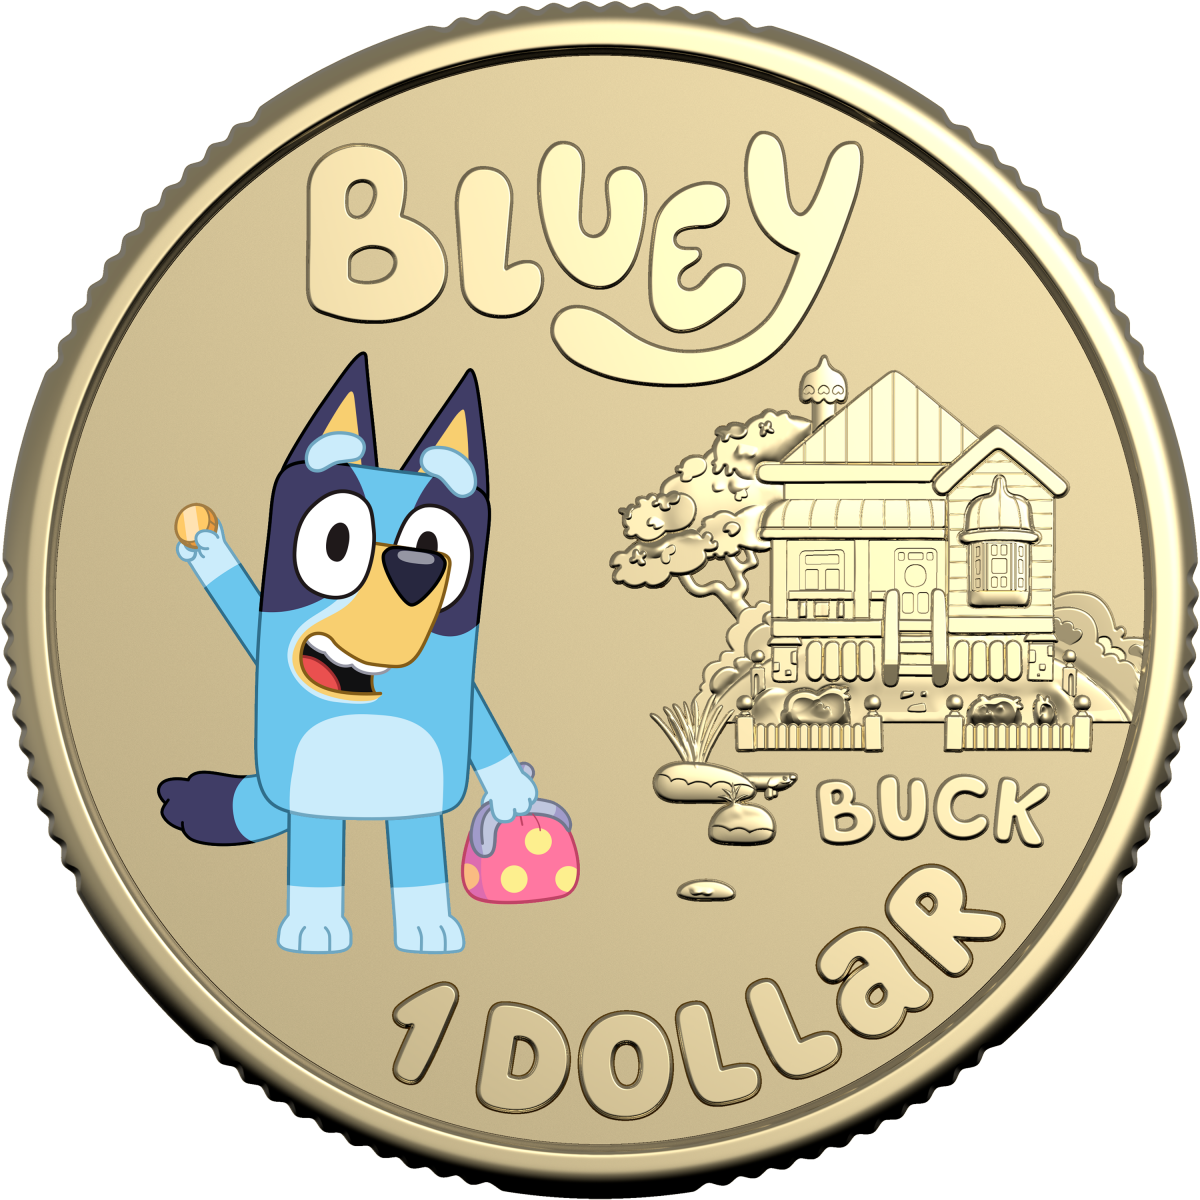 Bluey Features on Her Own Set of Dollarbuck Coins